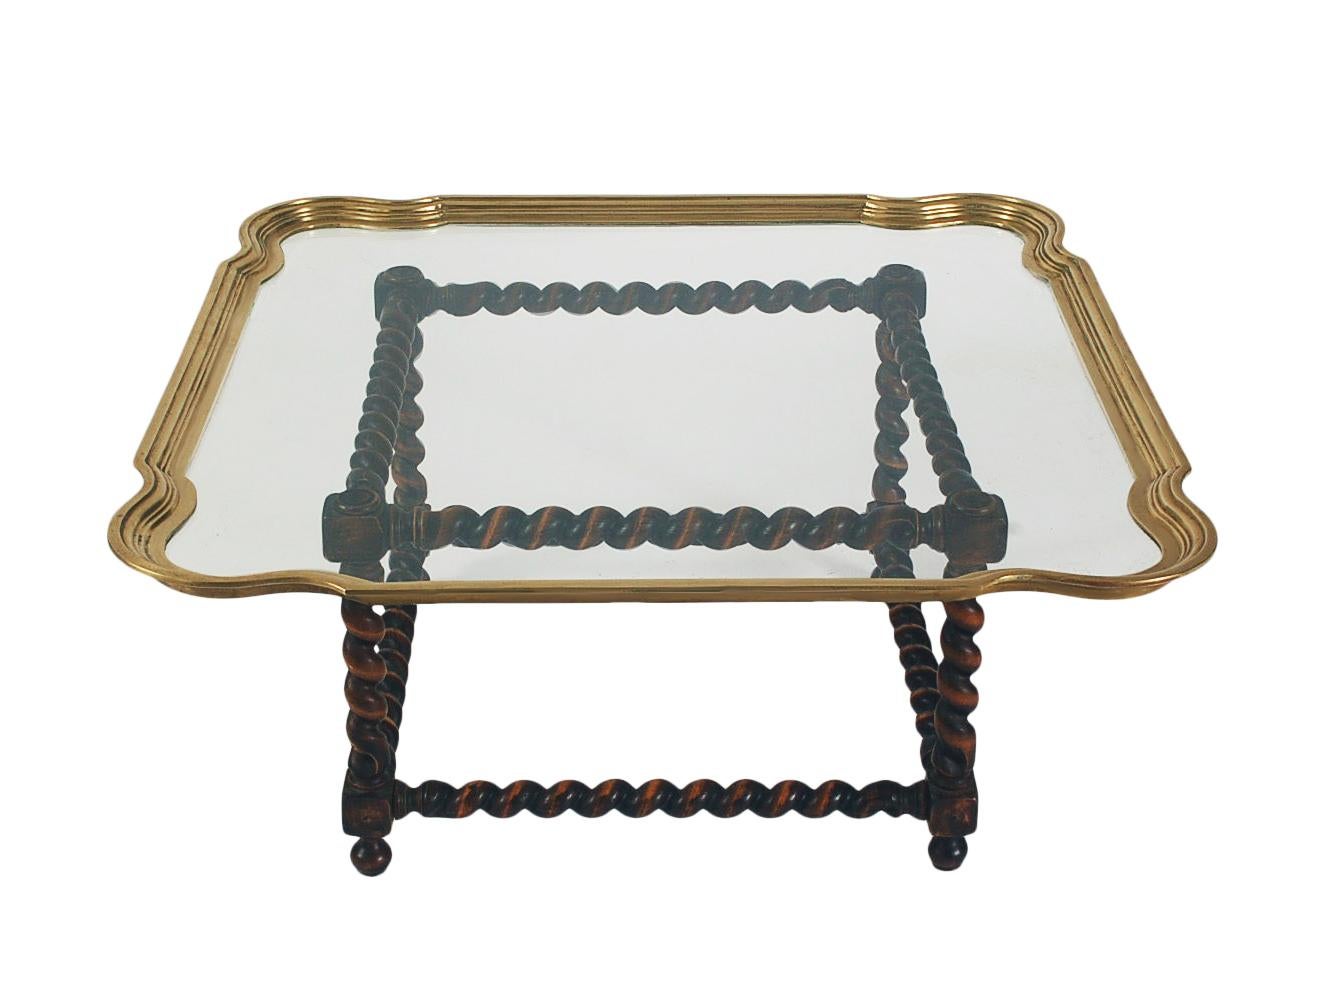 A classic transitional design coffee table circa 1970's. It features a thick solid wood base with clear glass and brass table top.